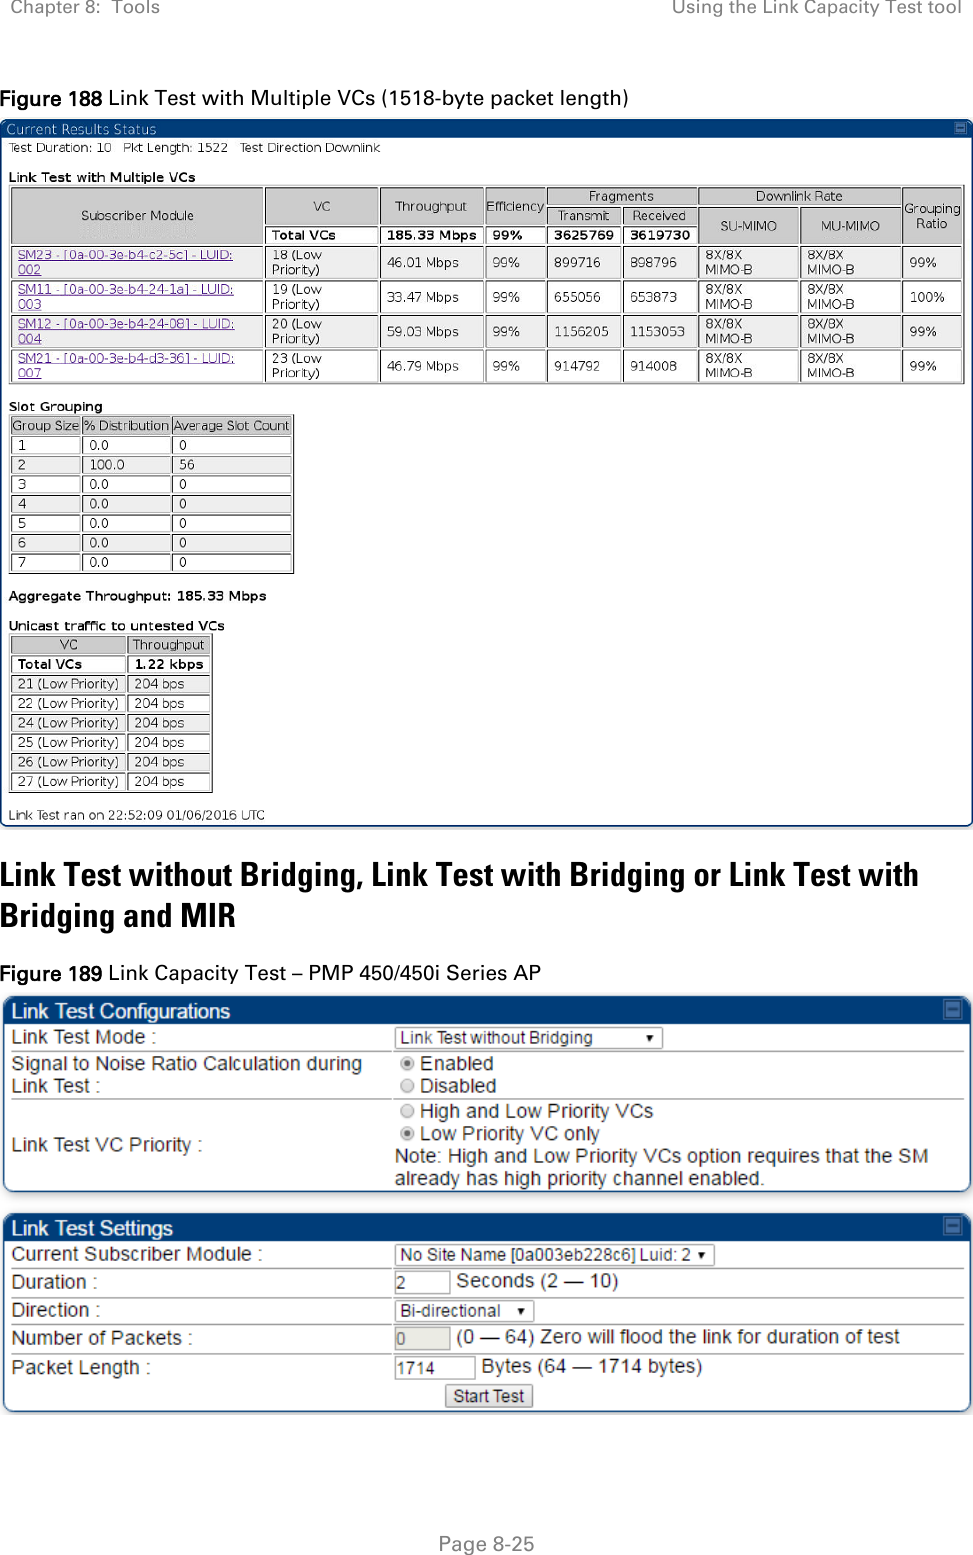 Chapter 8:  Tools Using the Link Capacity Test tool   Page 8-25 Figure 188 Link Test with Multiple VCs (1518-byte packet length)  Link Test without Bridging, Link Test with Bridging or Link Test with Bridging and MIR Figure 189 Link Capacity Test – PMP 450/450i Series AP  